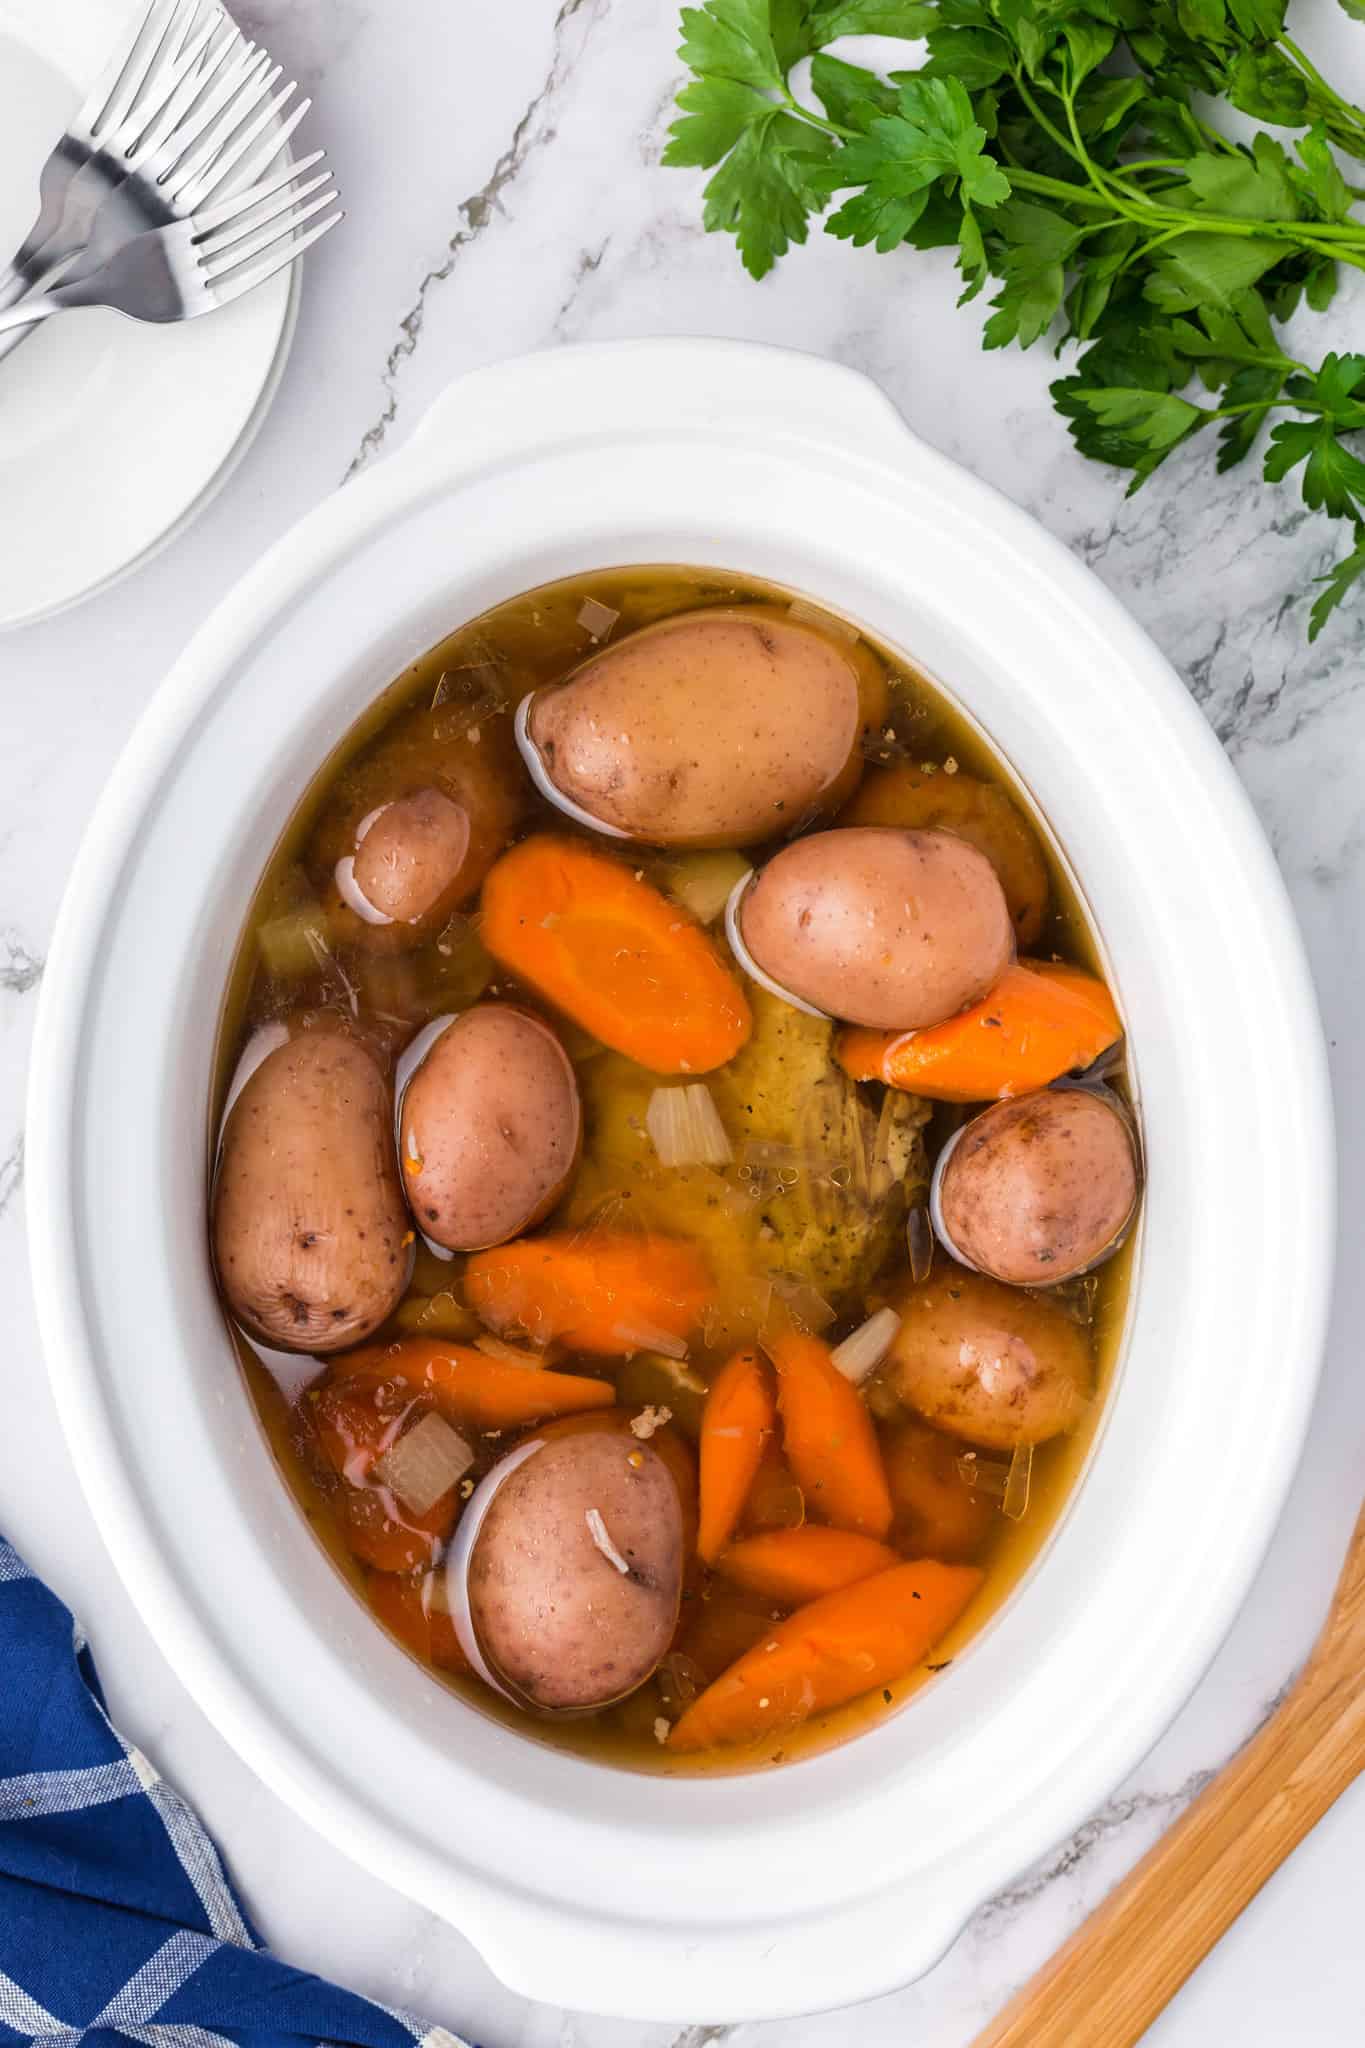 potatoes and carrots on top of corned beef brisket in a crock pot